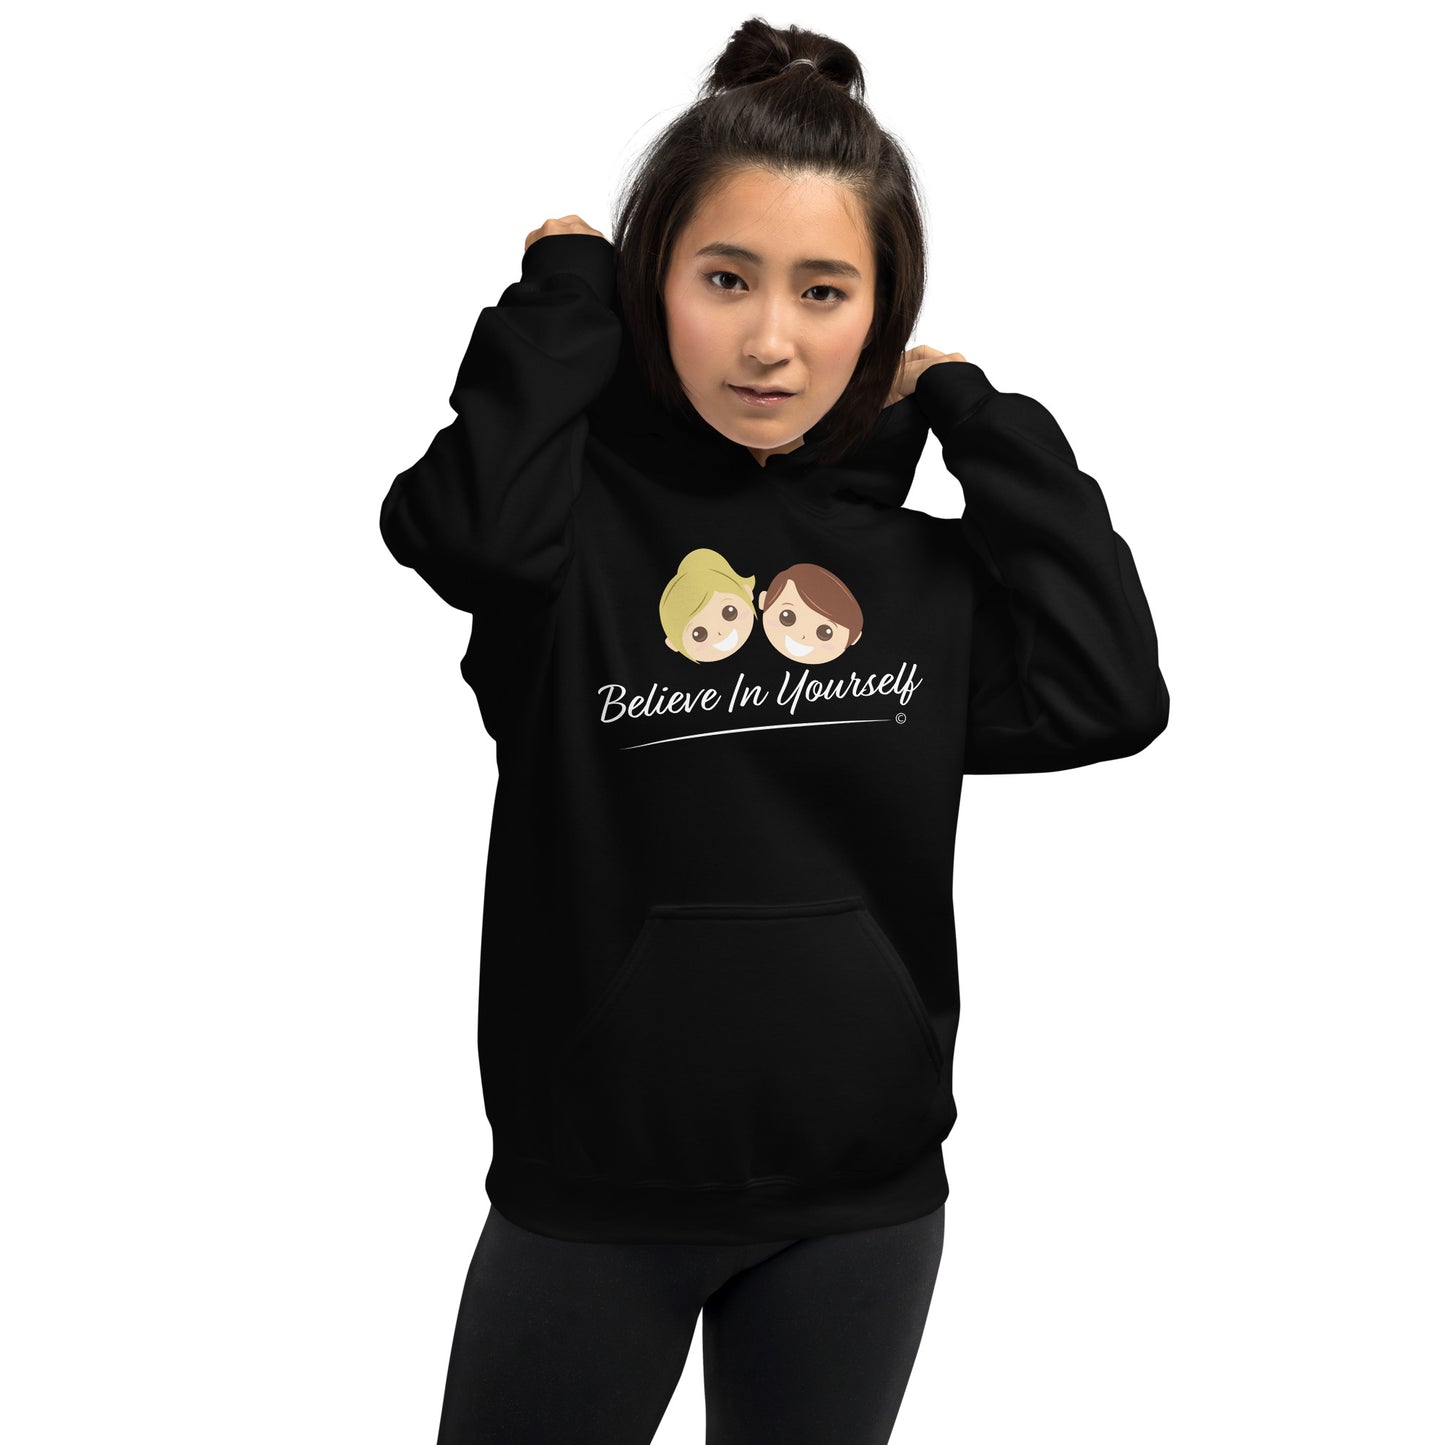 Unisex hoodies with all-season versatility-Front View